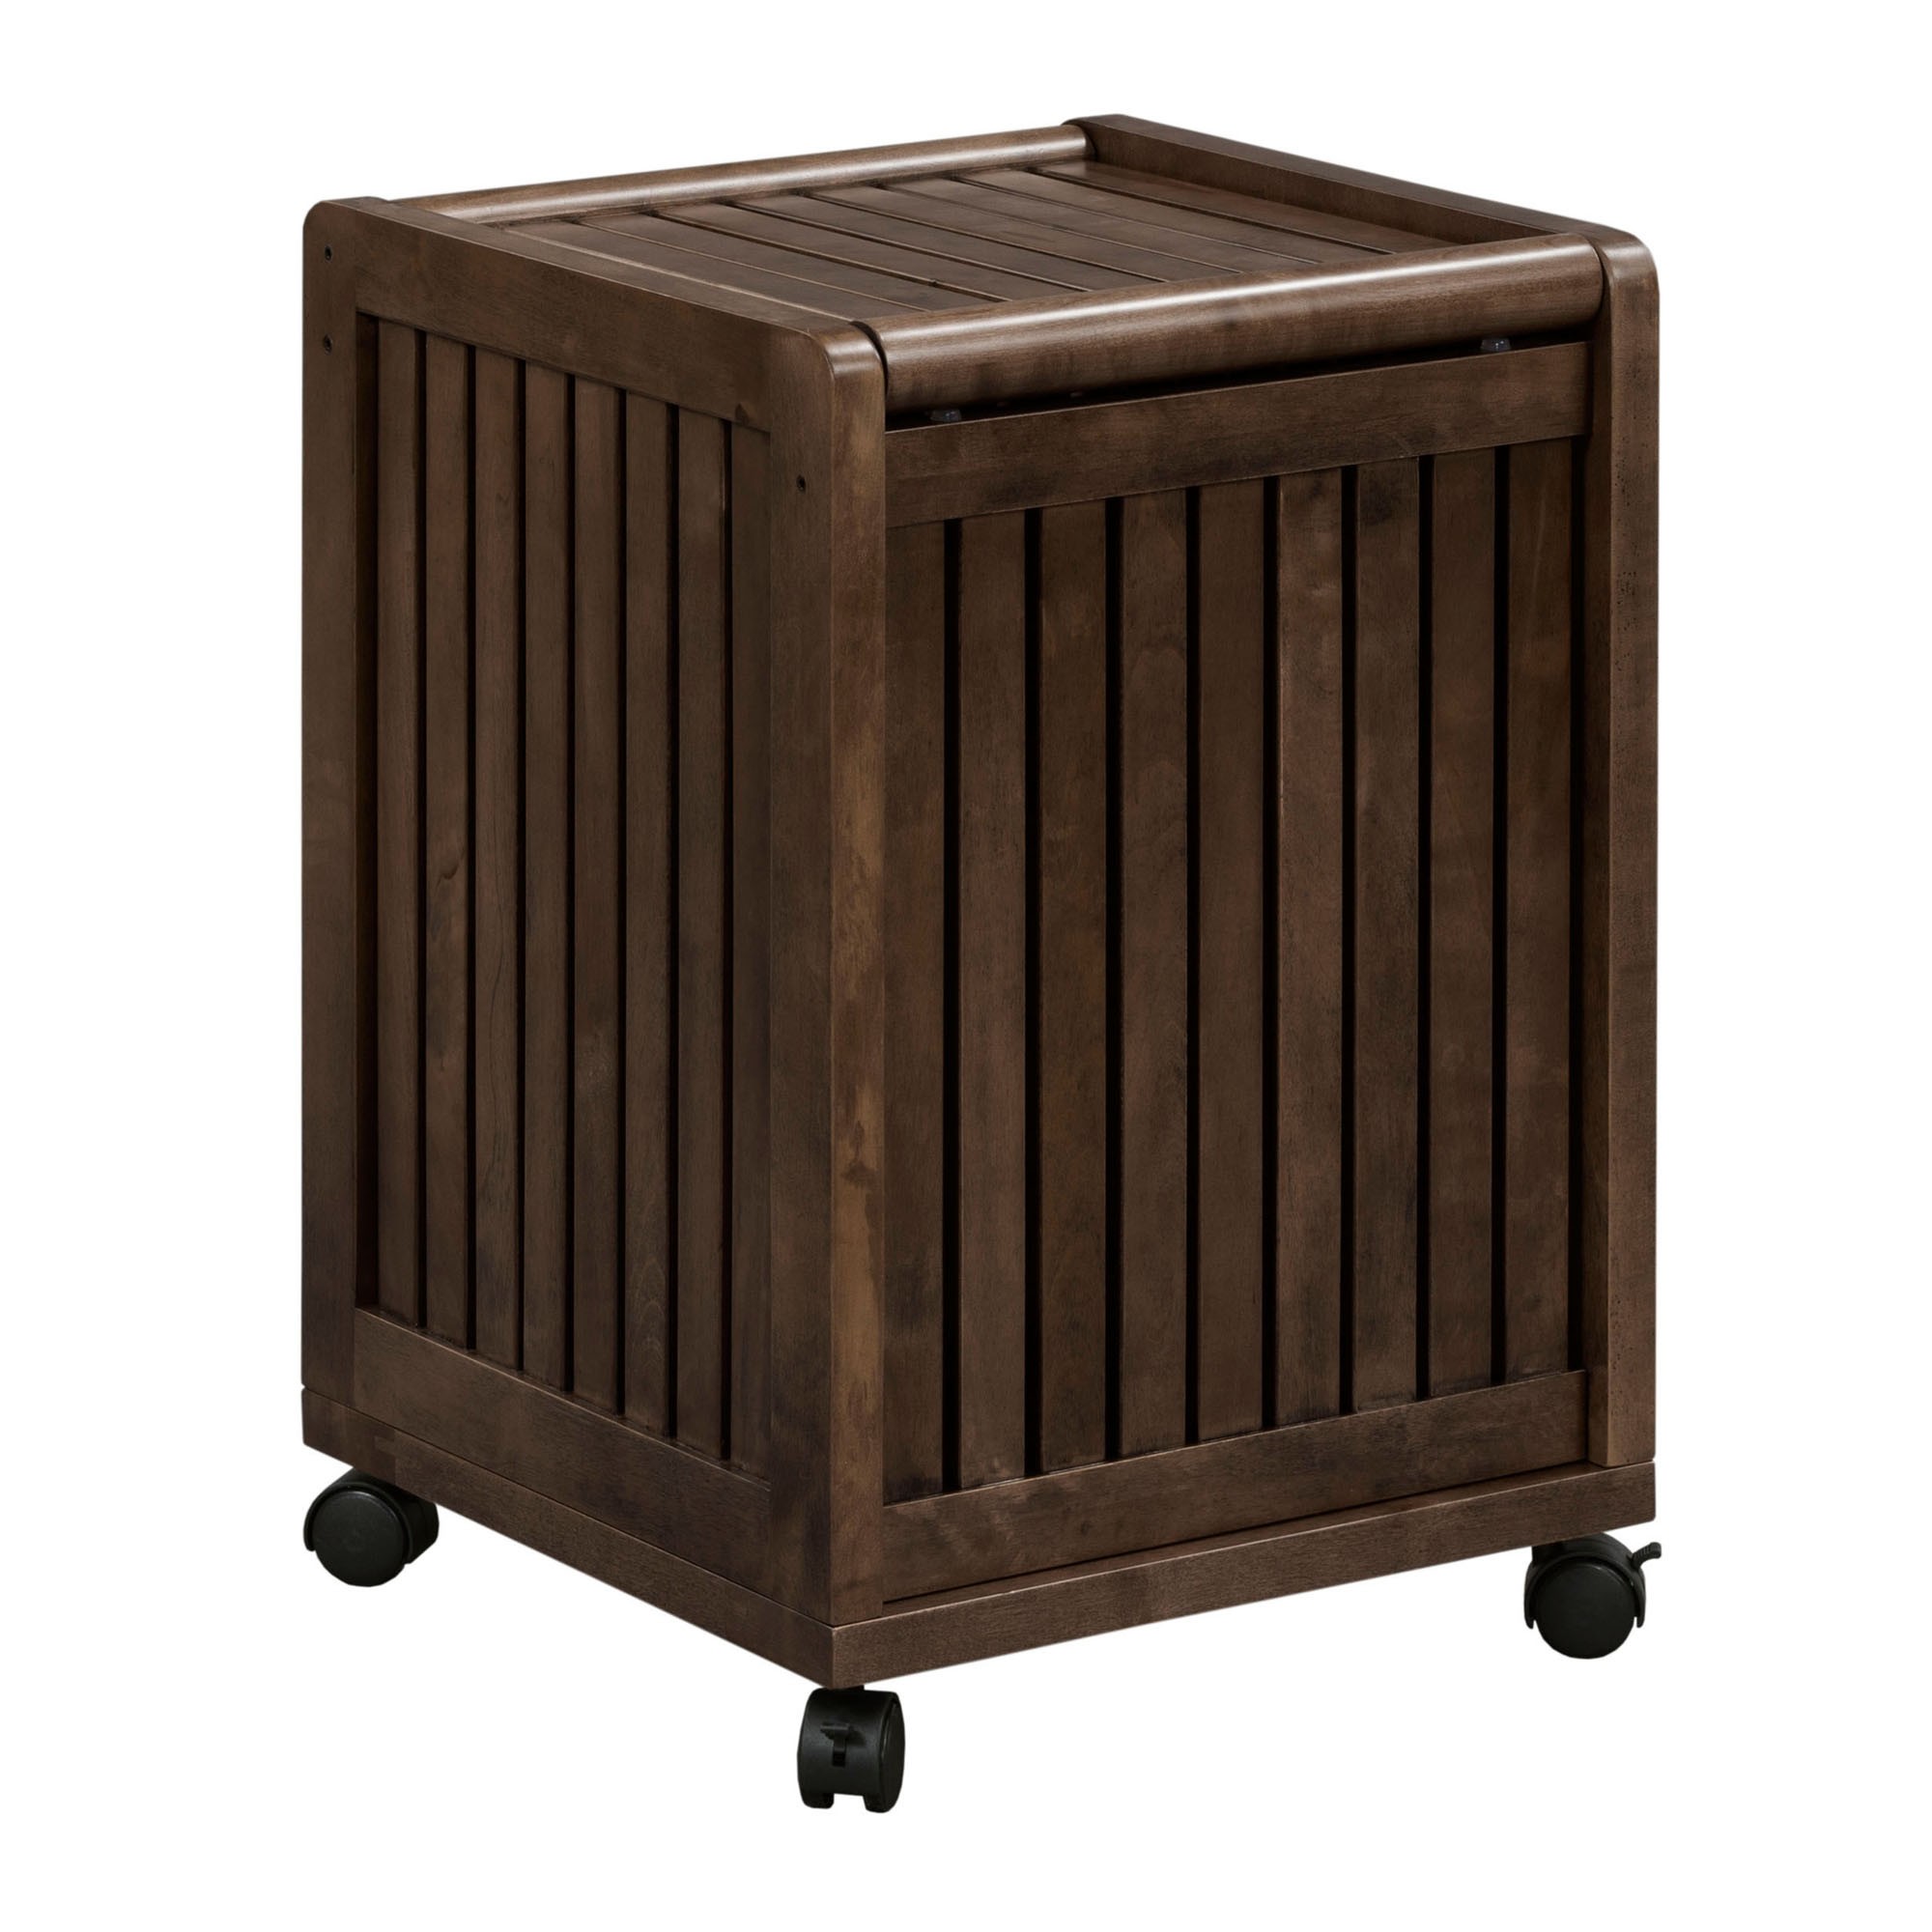 Rolling Solid Wood Laundry Hamper with Lid in Espresso